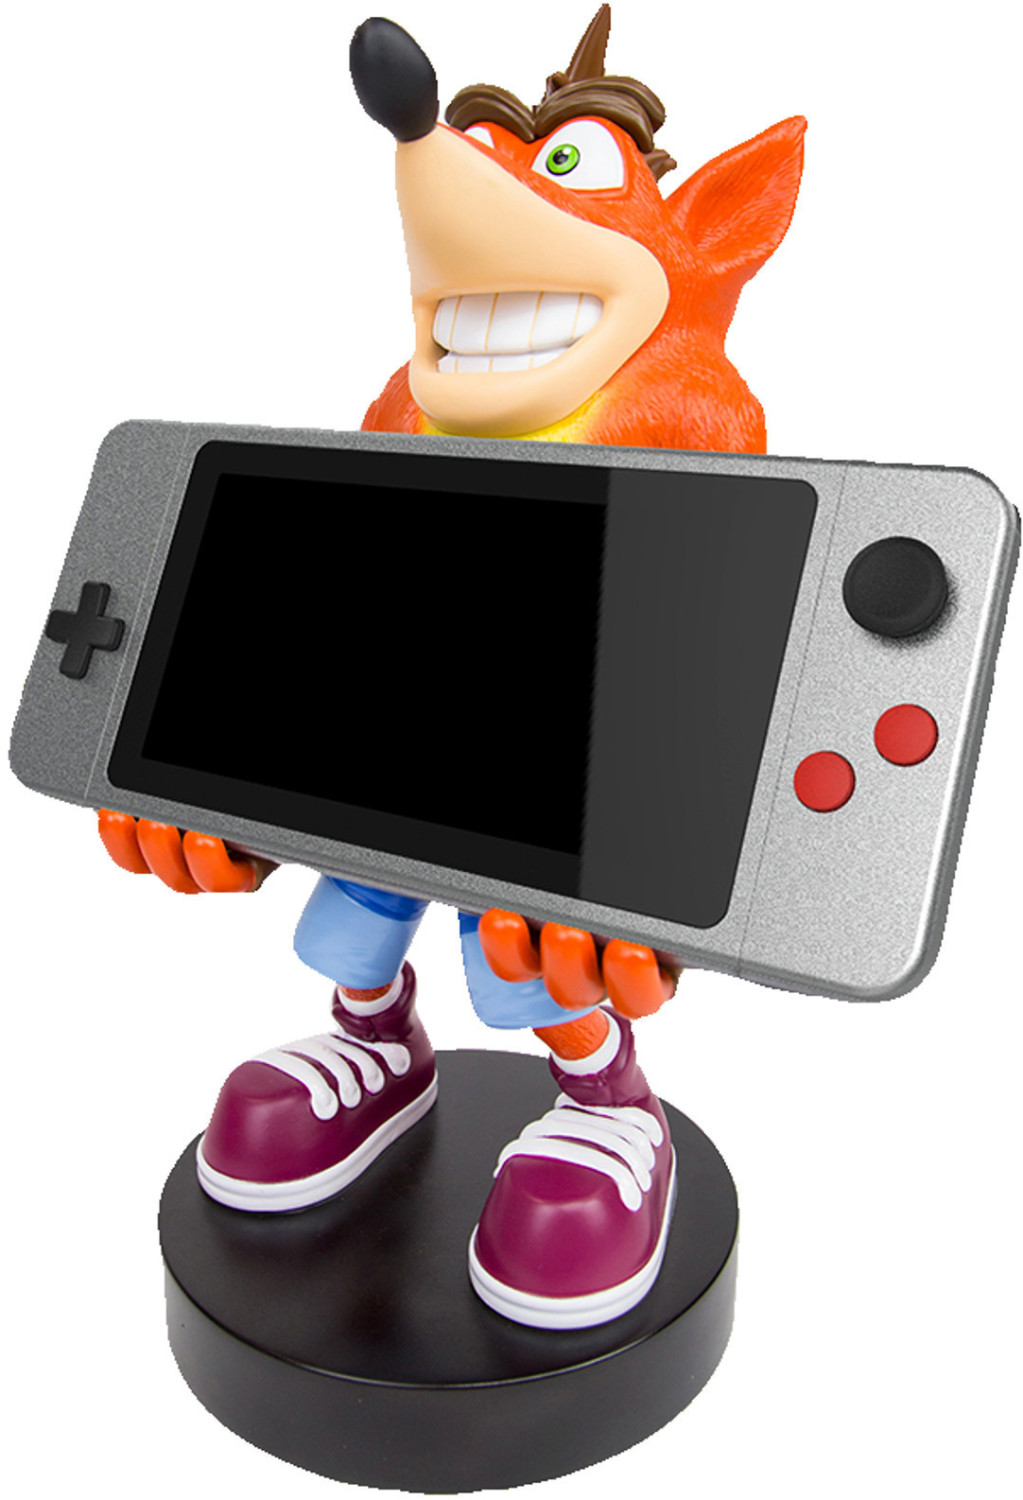 Figurine support + chargeur pour manette et smartphone - exquisite gaming -  knuckles - Conforama